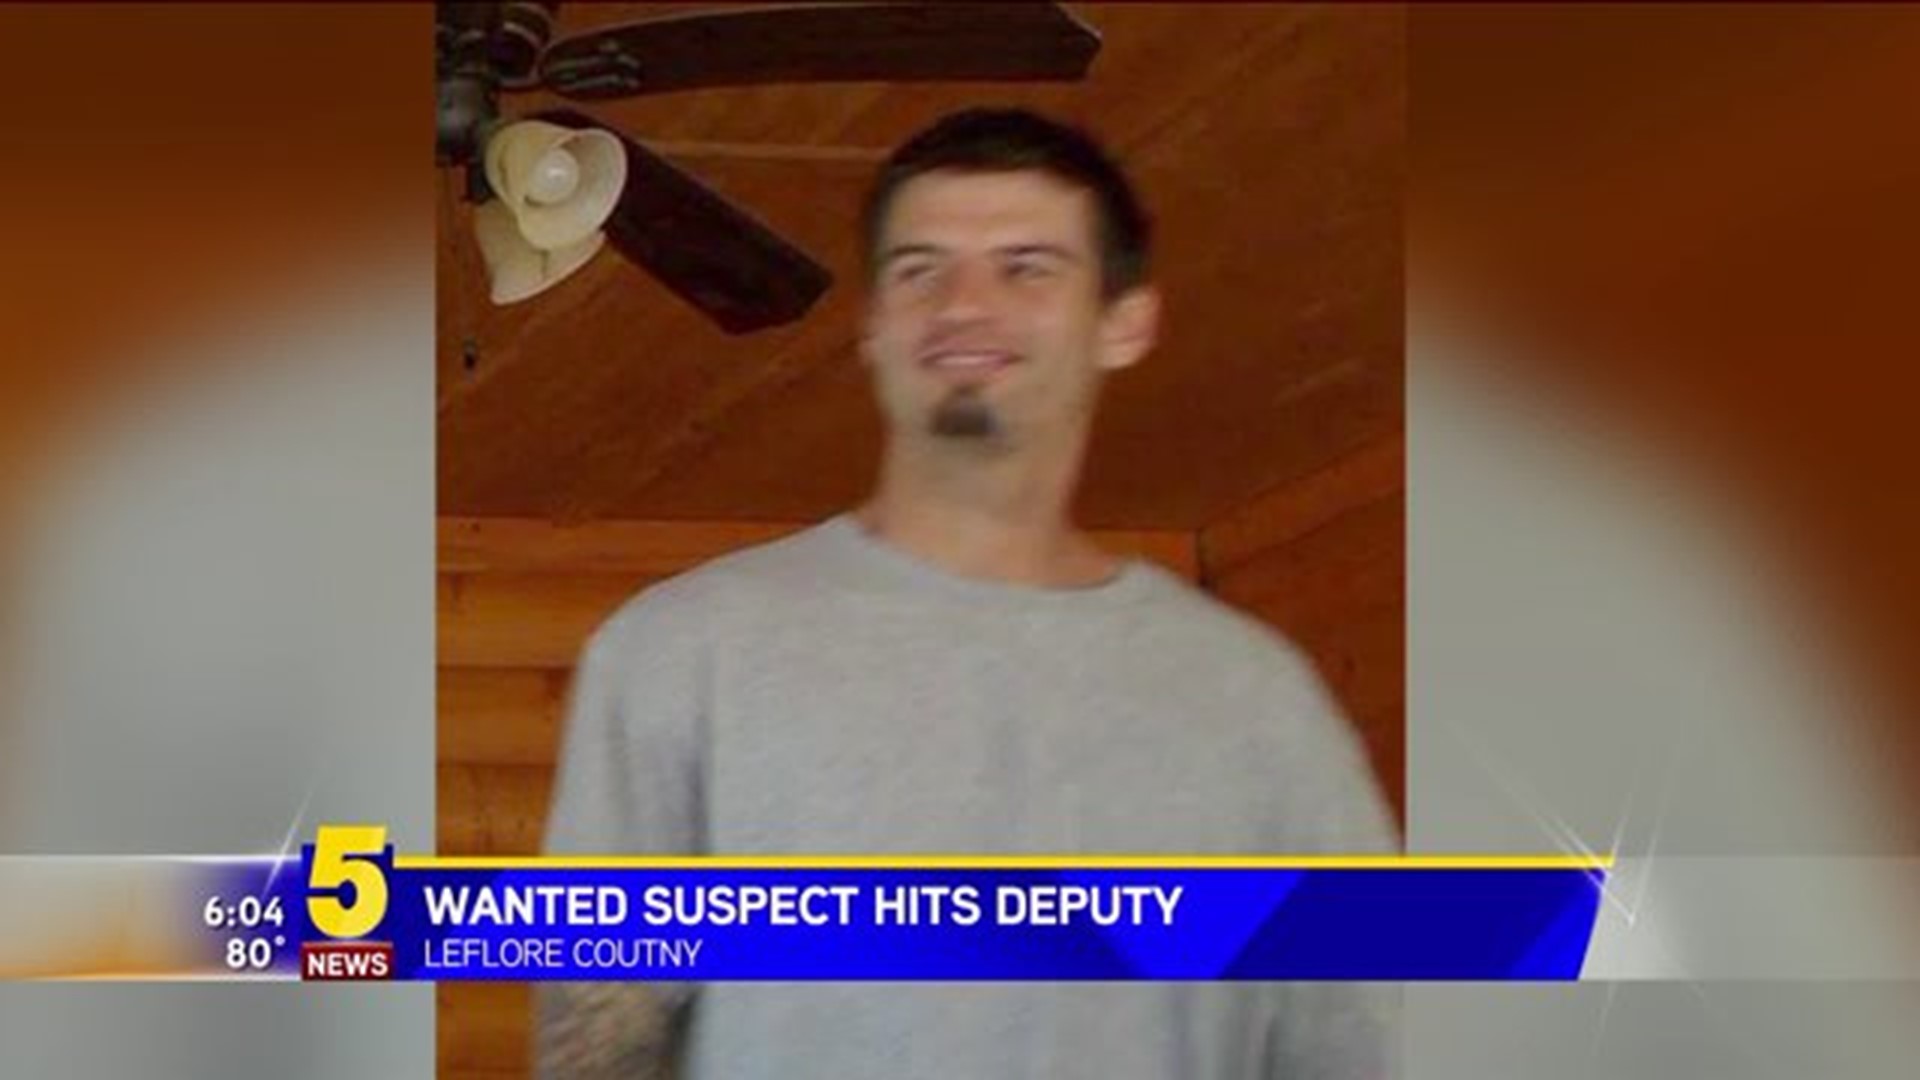 Wanted Suspect Hits Deputy